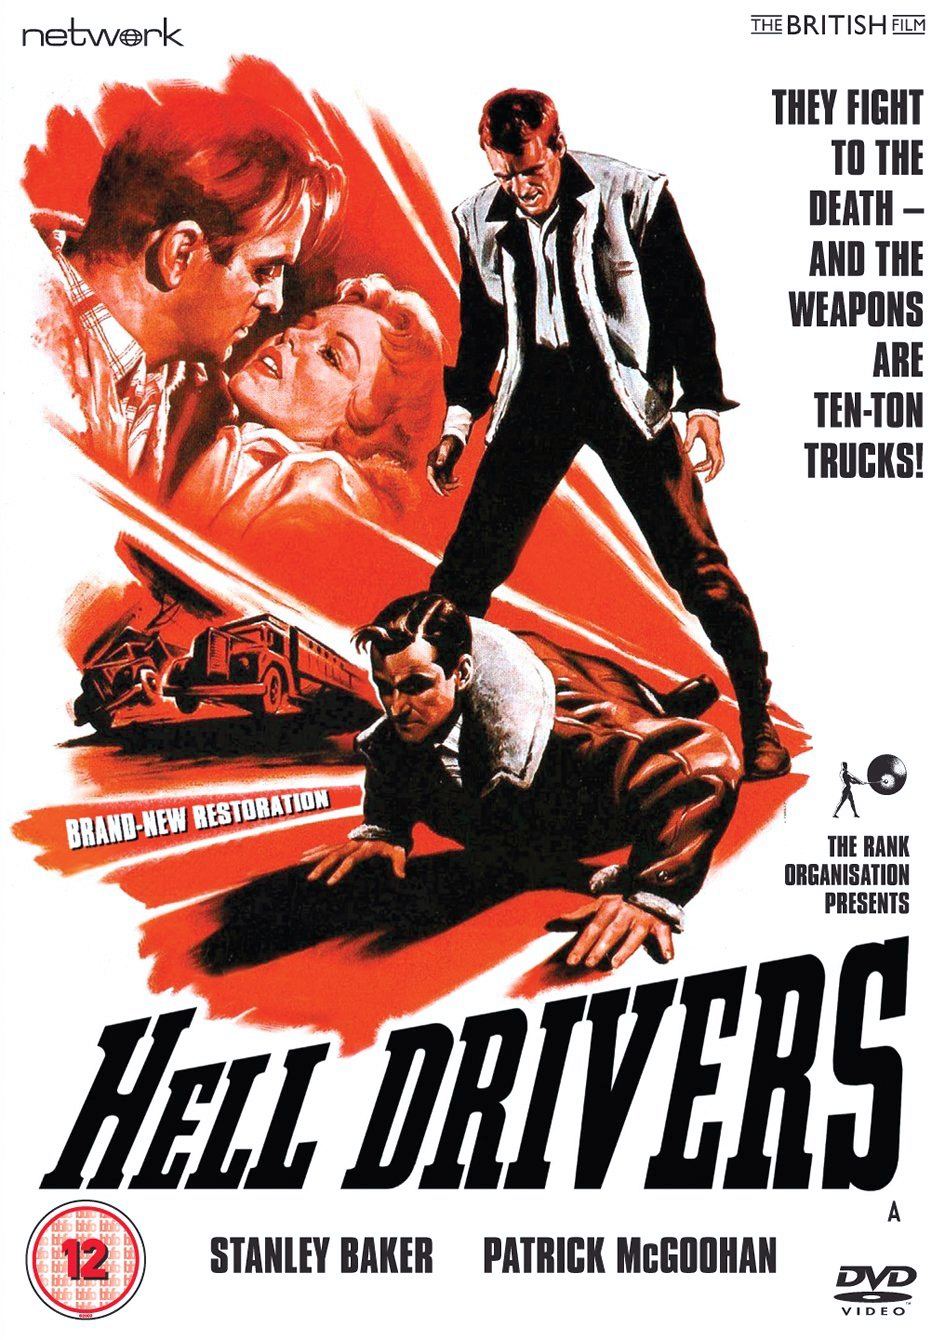 Hell Drivers DVD from Network and the British Film